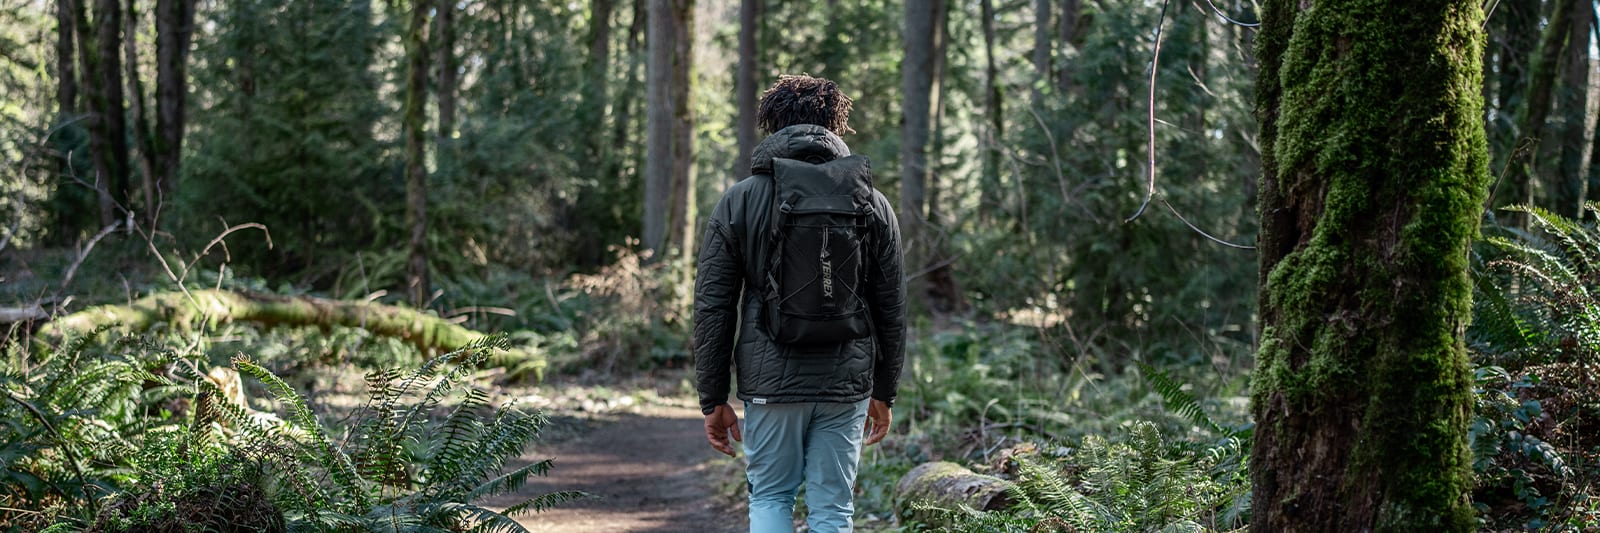 What To Bring On a Hike: 12 Hiking Essentials